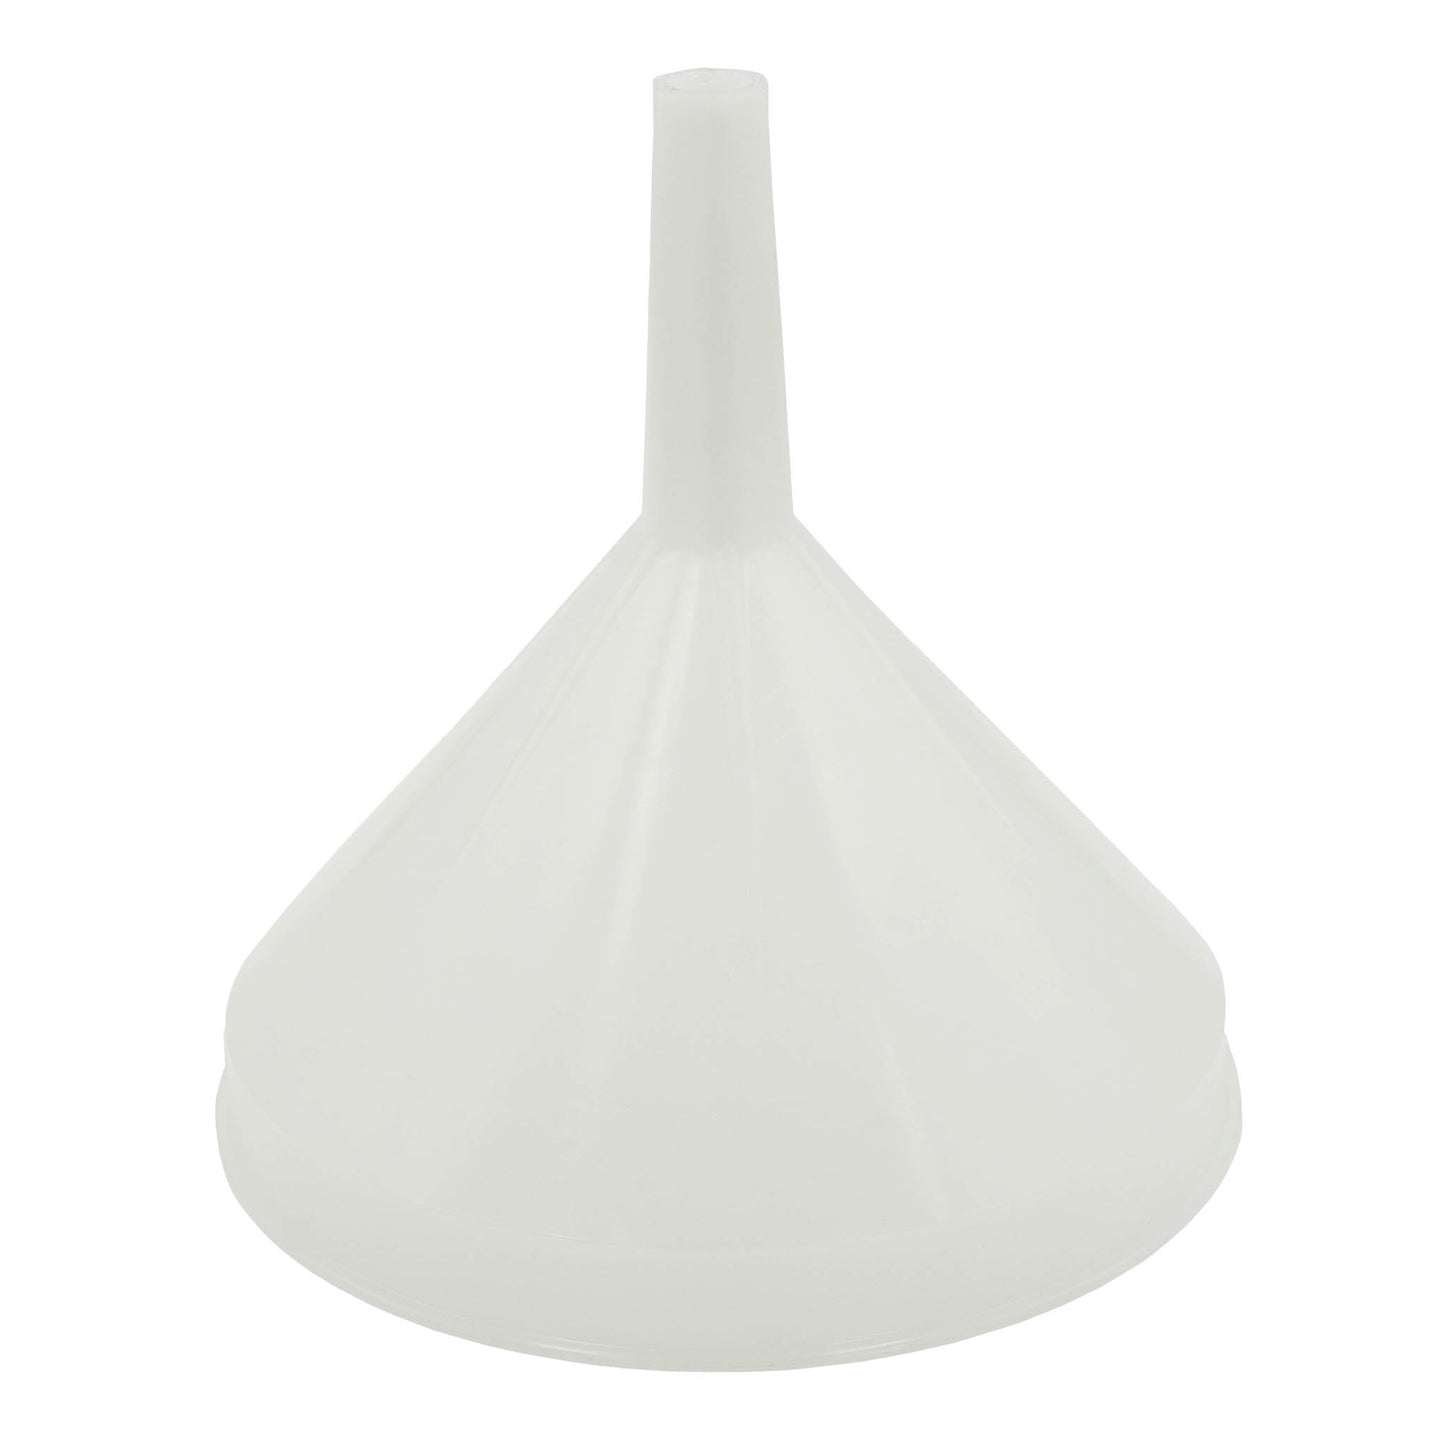 12cm diameter white food grade plastic funnel with no filter rest. 